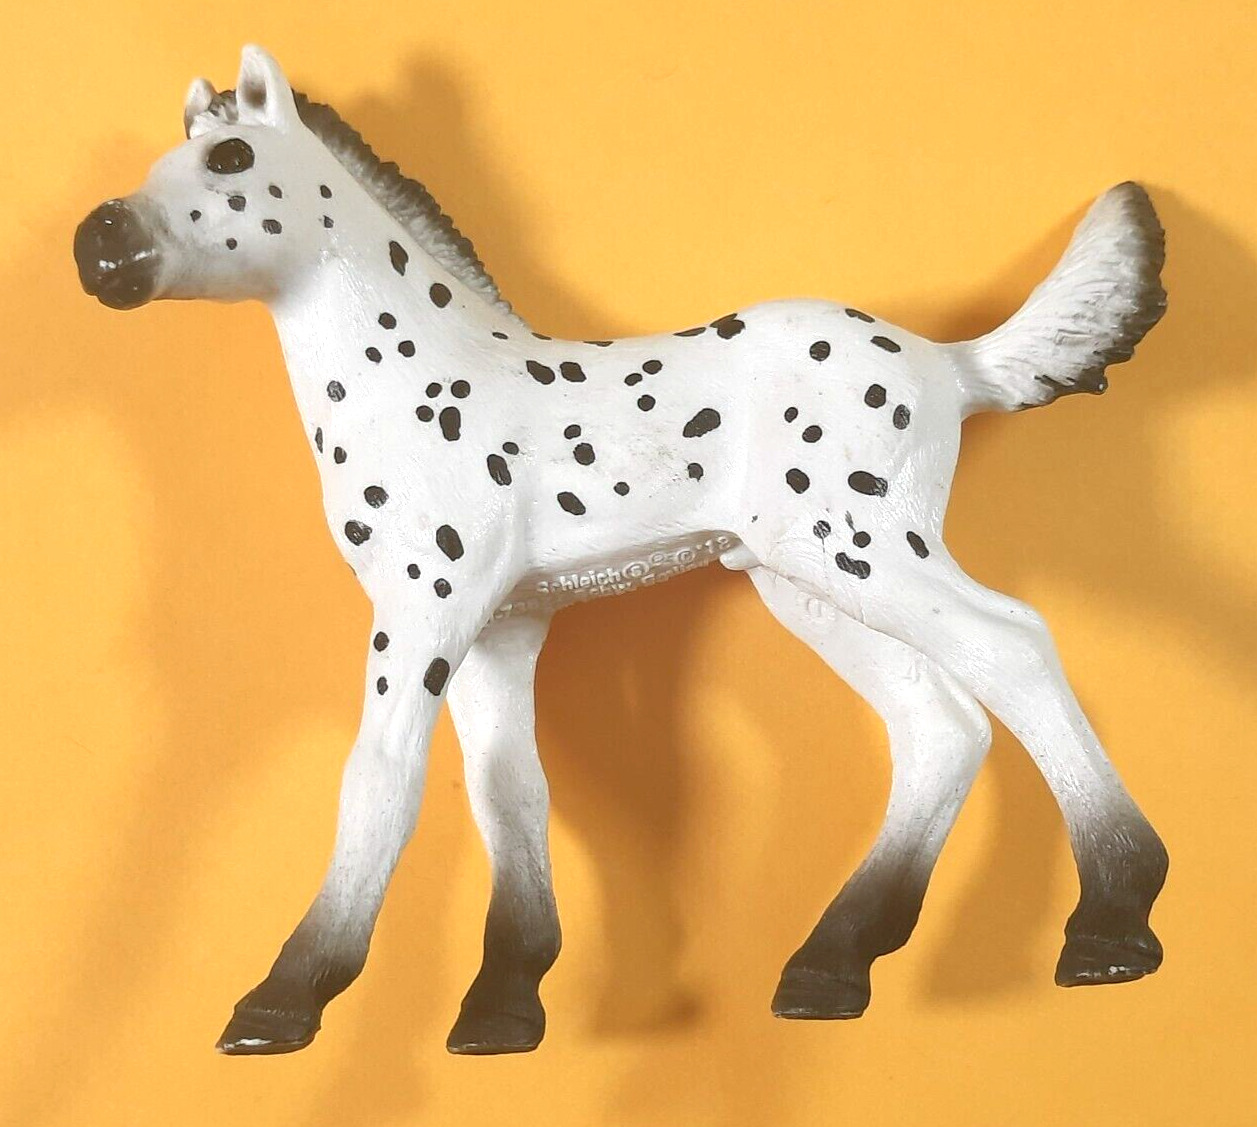 SCHLEICH horse 2018 3 inches tall pre-owned